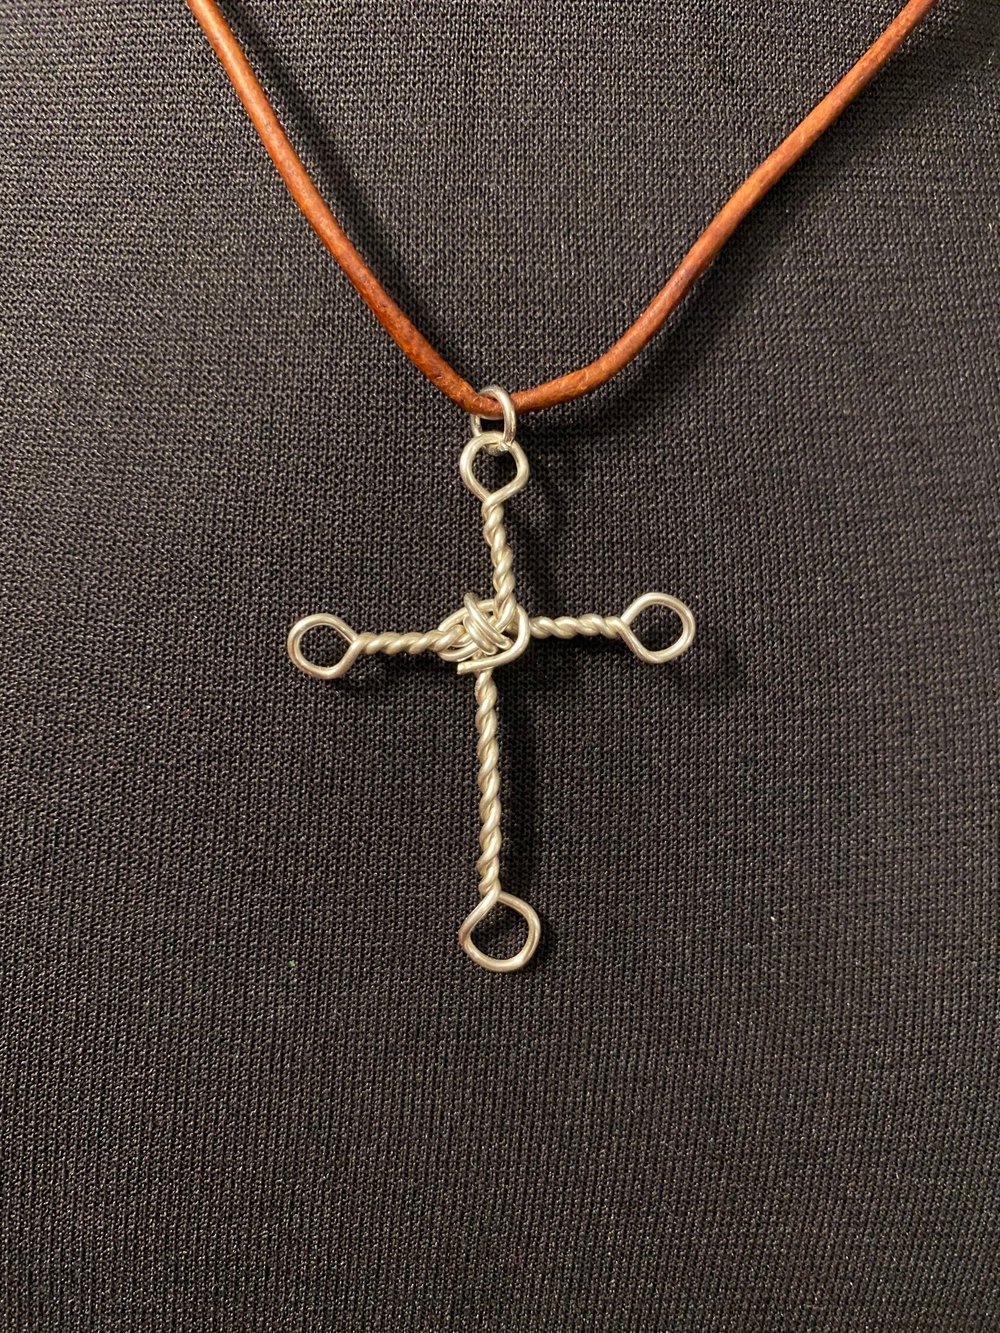 Silver Cross Leather Necklace